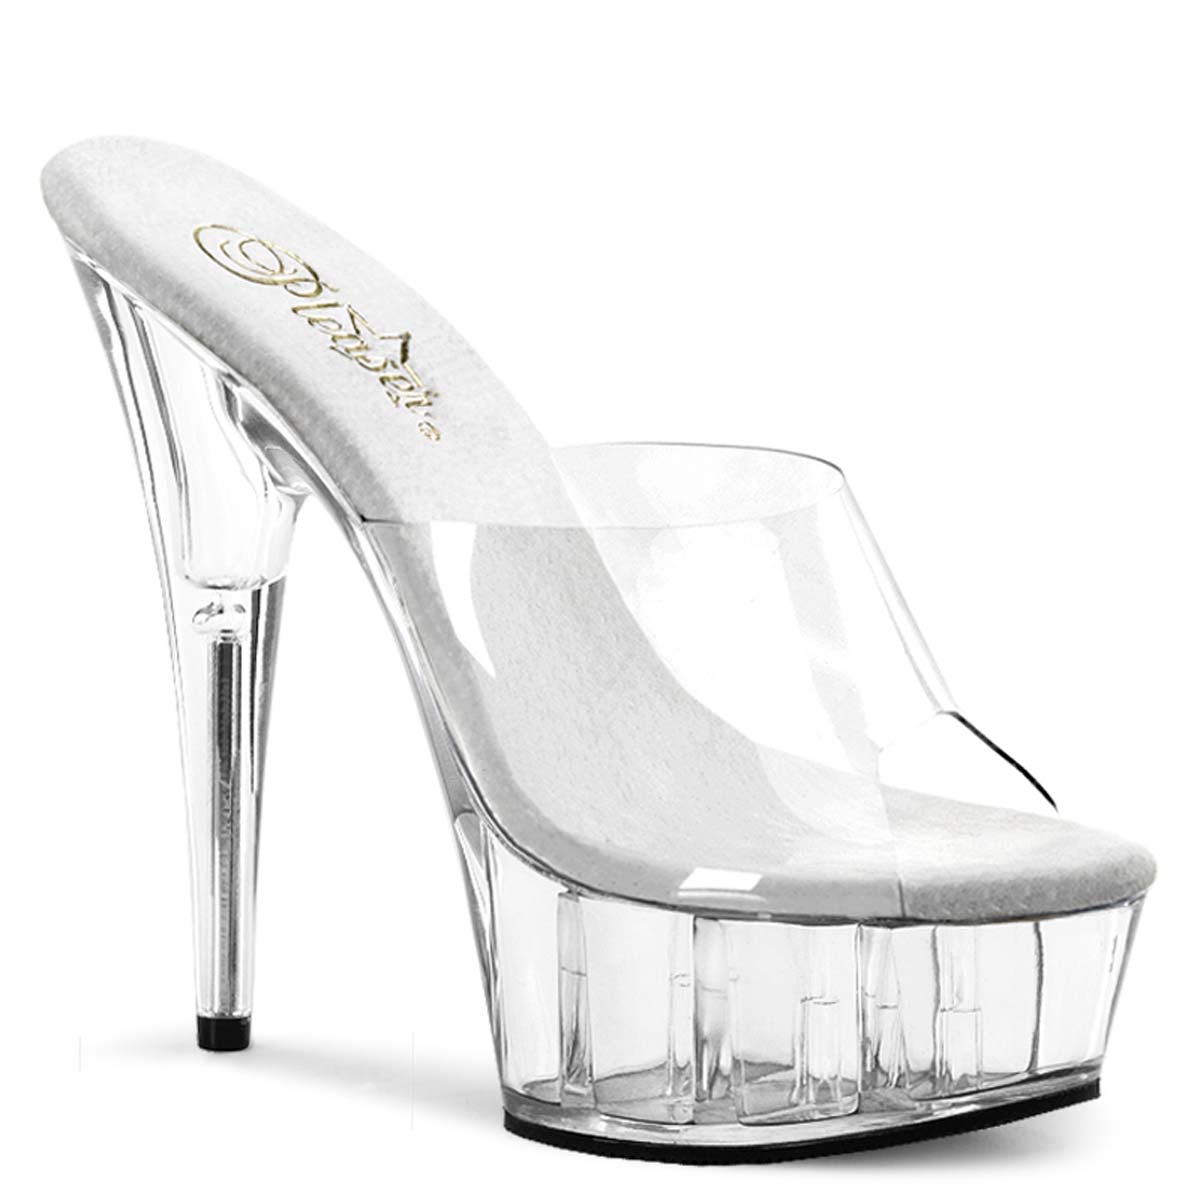 Pleaser Delight-601 - Clear/Clear in Sexy Heels & Platforms - $47.95